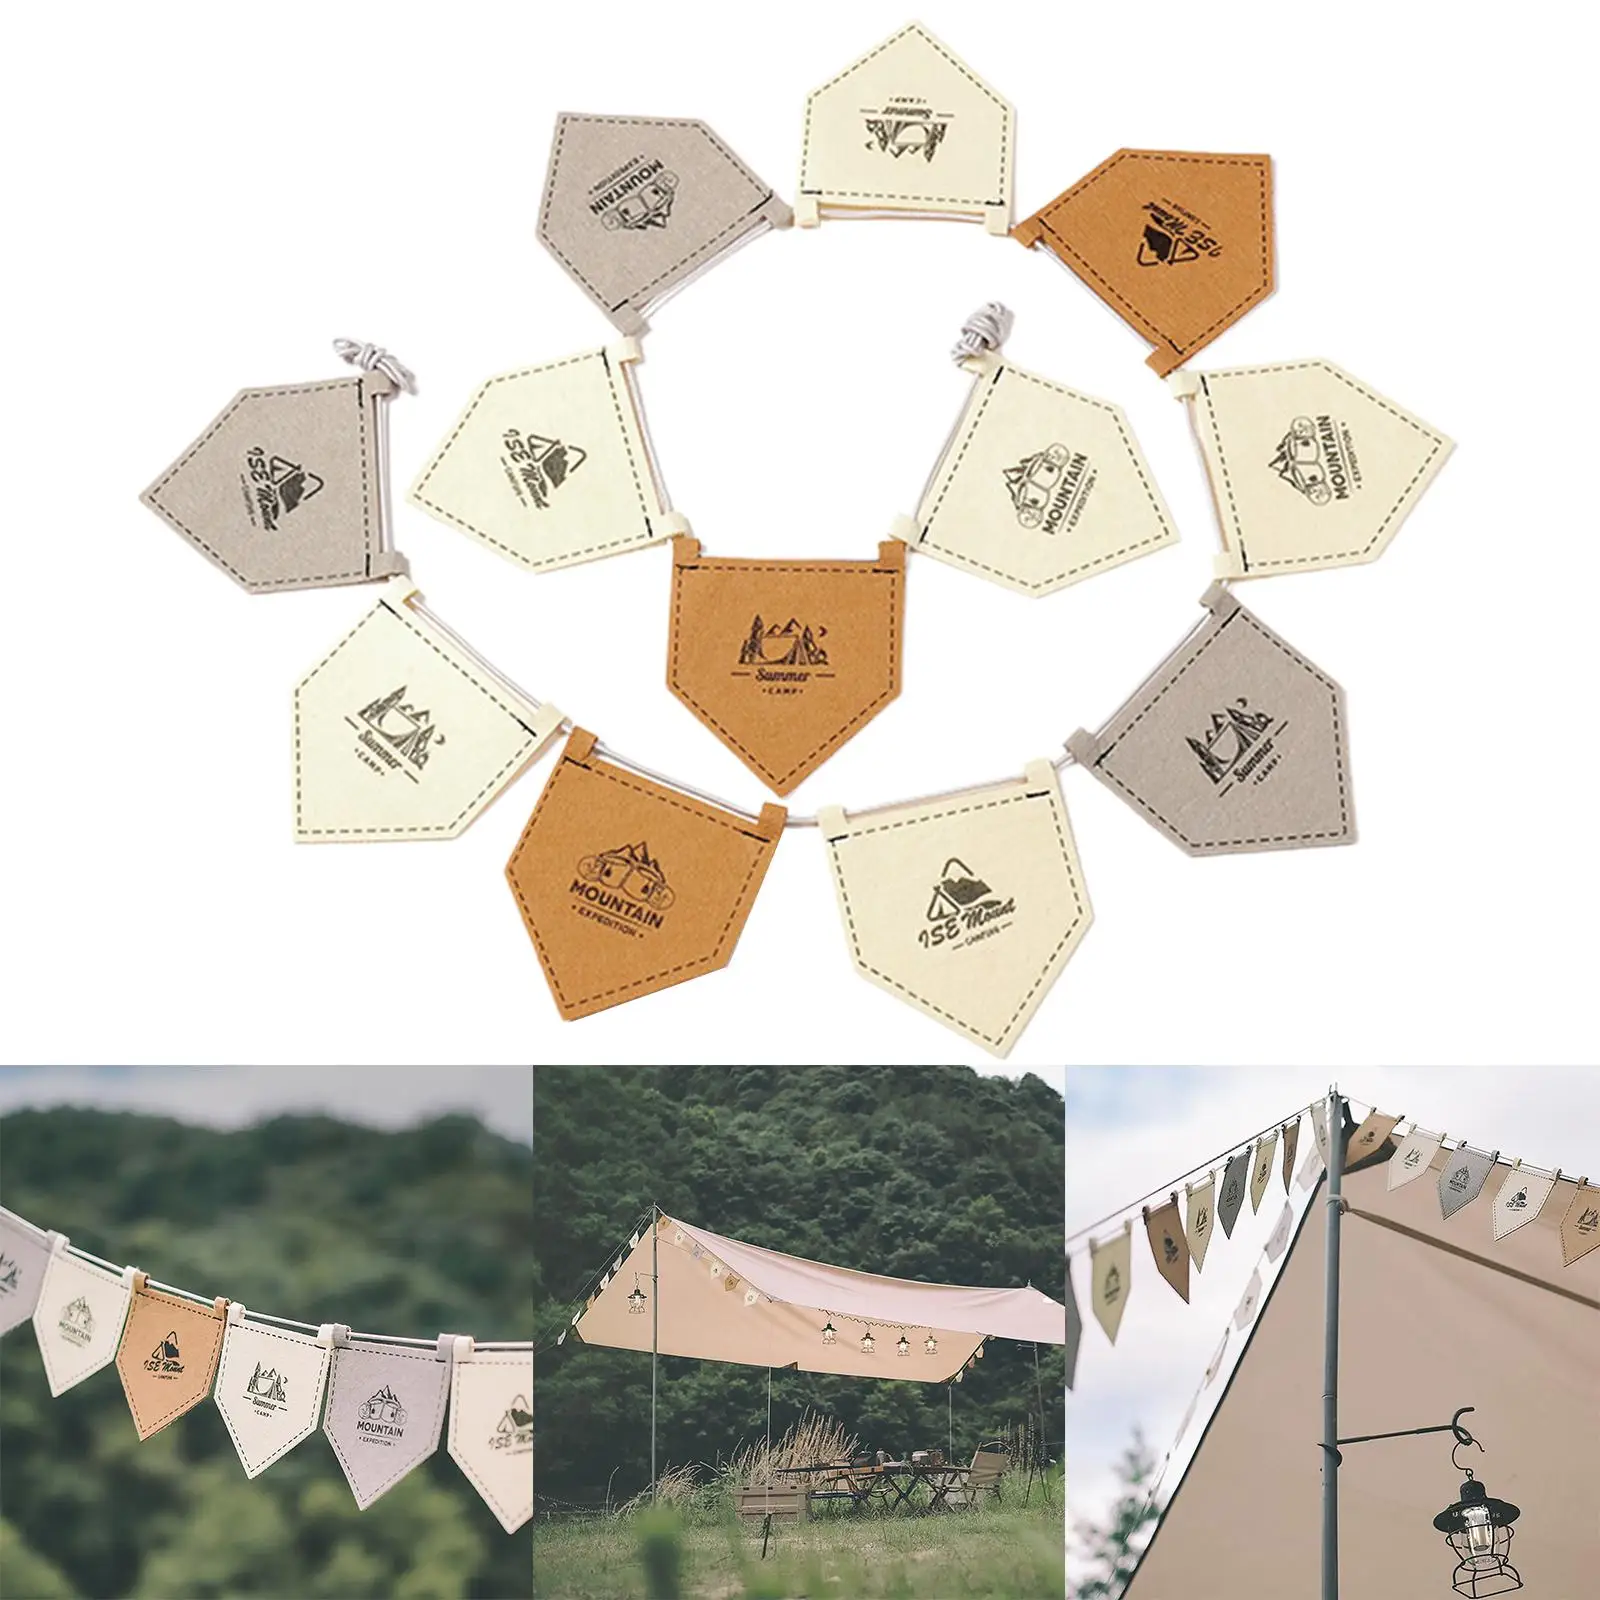 

Felt Pentagon 6M Camping Picnic Banner Flags Adjustable Decoration Outdoor Indoor Use Stylish Reusable Accessories Easily Carry